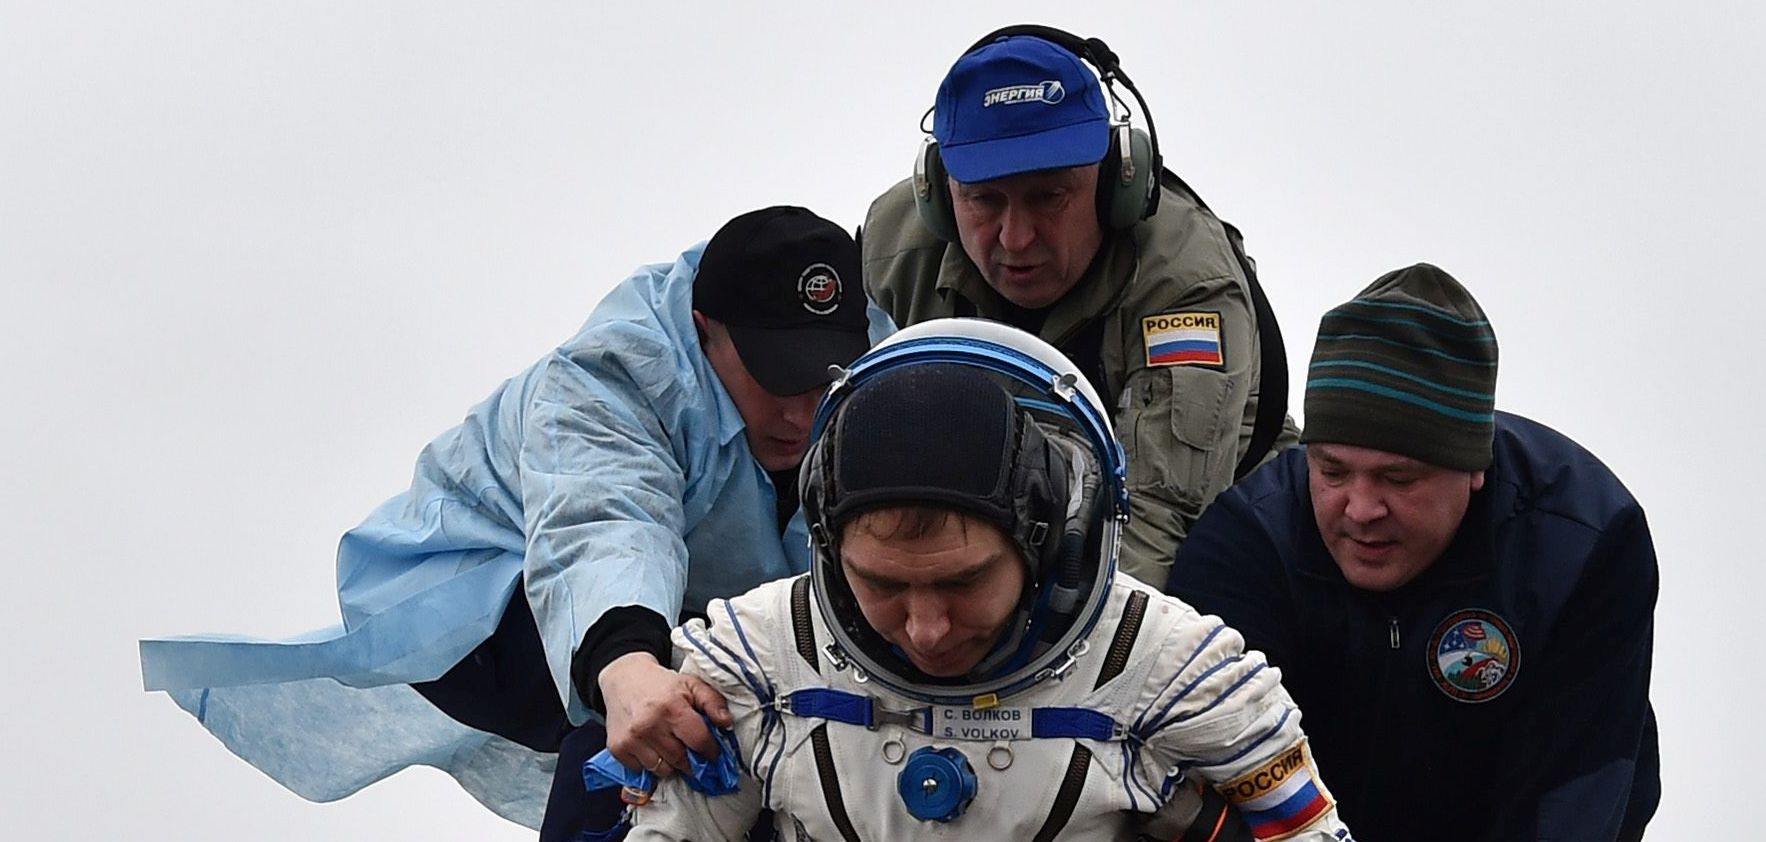 epa05189897 Ground personnel help International Space Station (ISS) crew member Sergei Volkov of Russia to get off the Soyuz TMA-18M space capsule after landing near the town of Dzhezkazgan (Zhezkazgan), Kazakhstan, 02 March 2016. US astronaut Scott Kelly and Russian cosmonaut Mikhail Kornienko returned to Earth on March 2 after spending almost a year in space in a ground-breaking experiment foreshadowing a potential manned mission to Mars.  EPA/KIRILL KUDRYAVTSEV/POOL